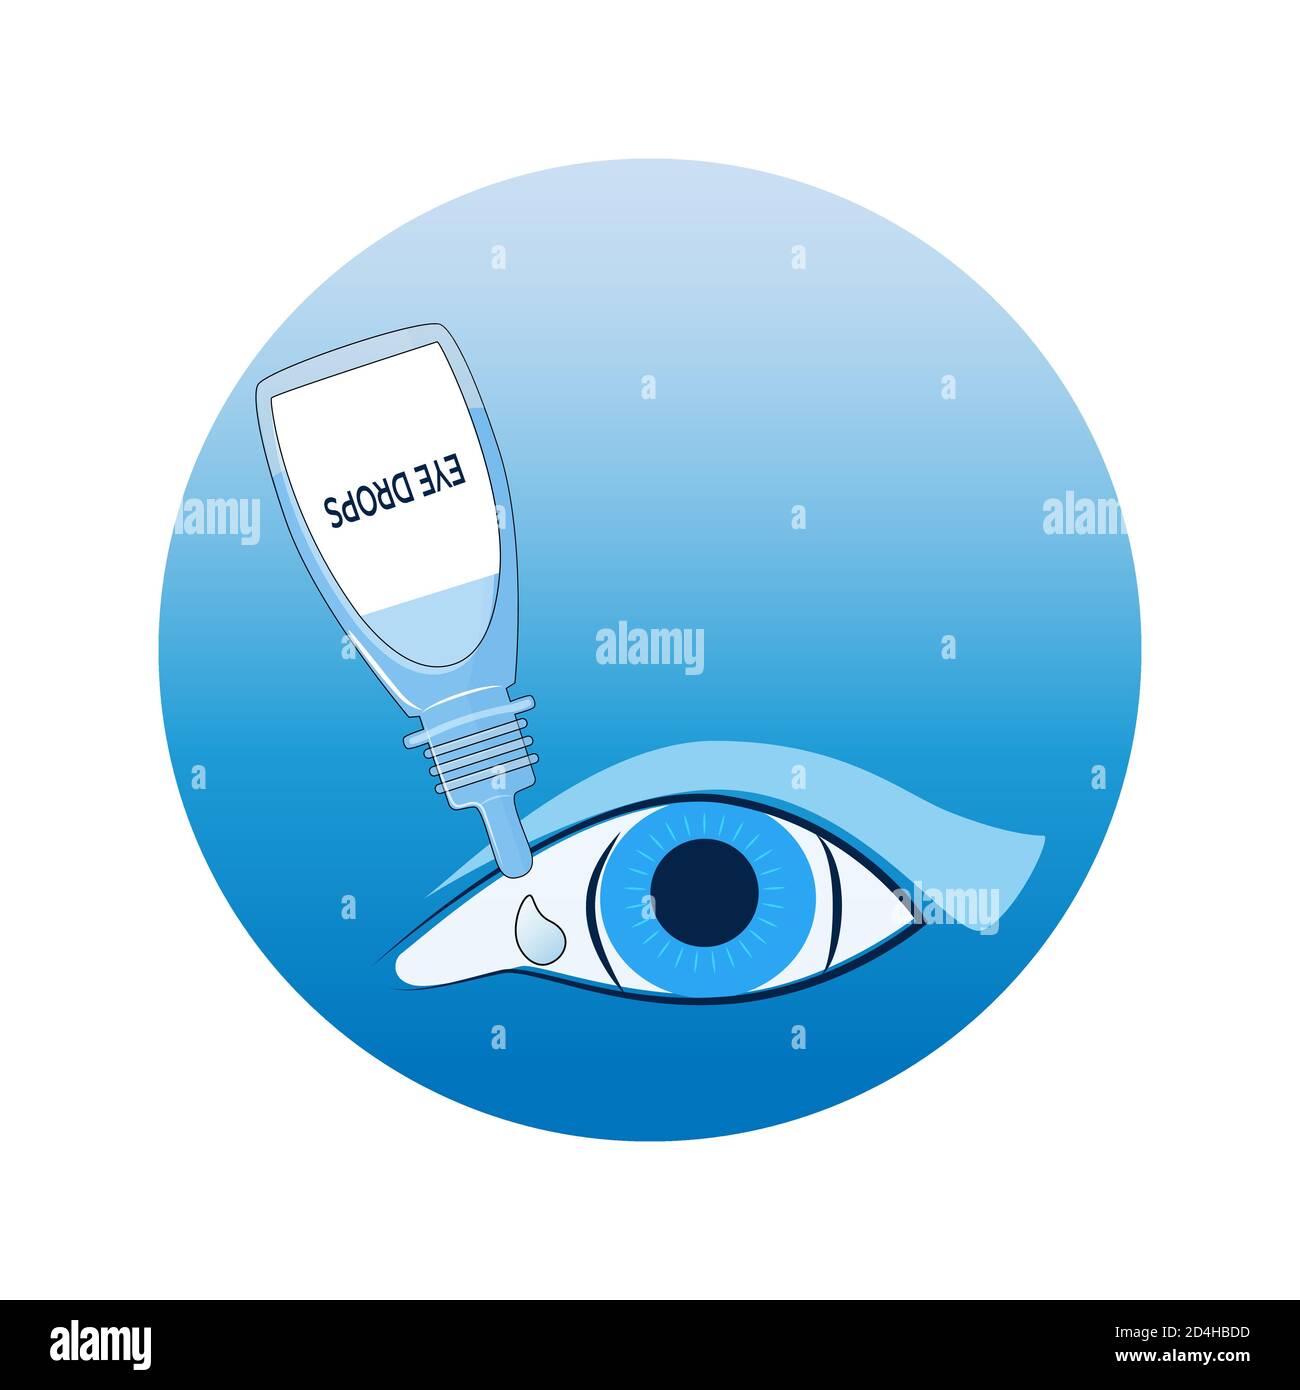 Eye drops bottle and eye icon isolated on white background, vector illustration. Stock Vector